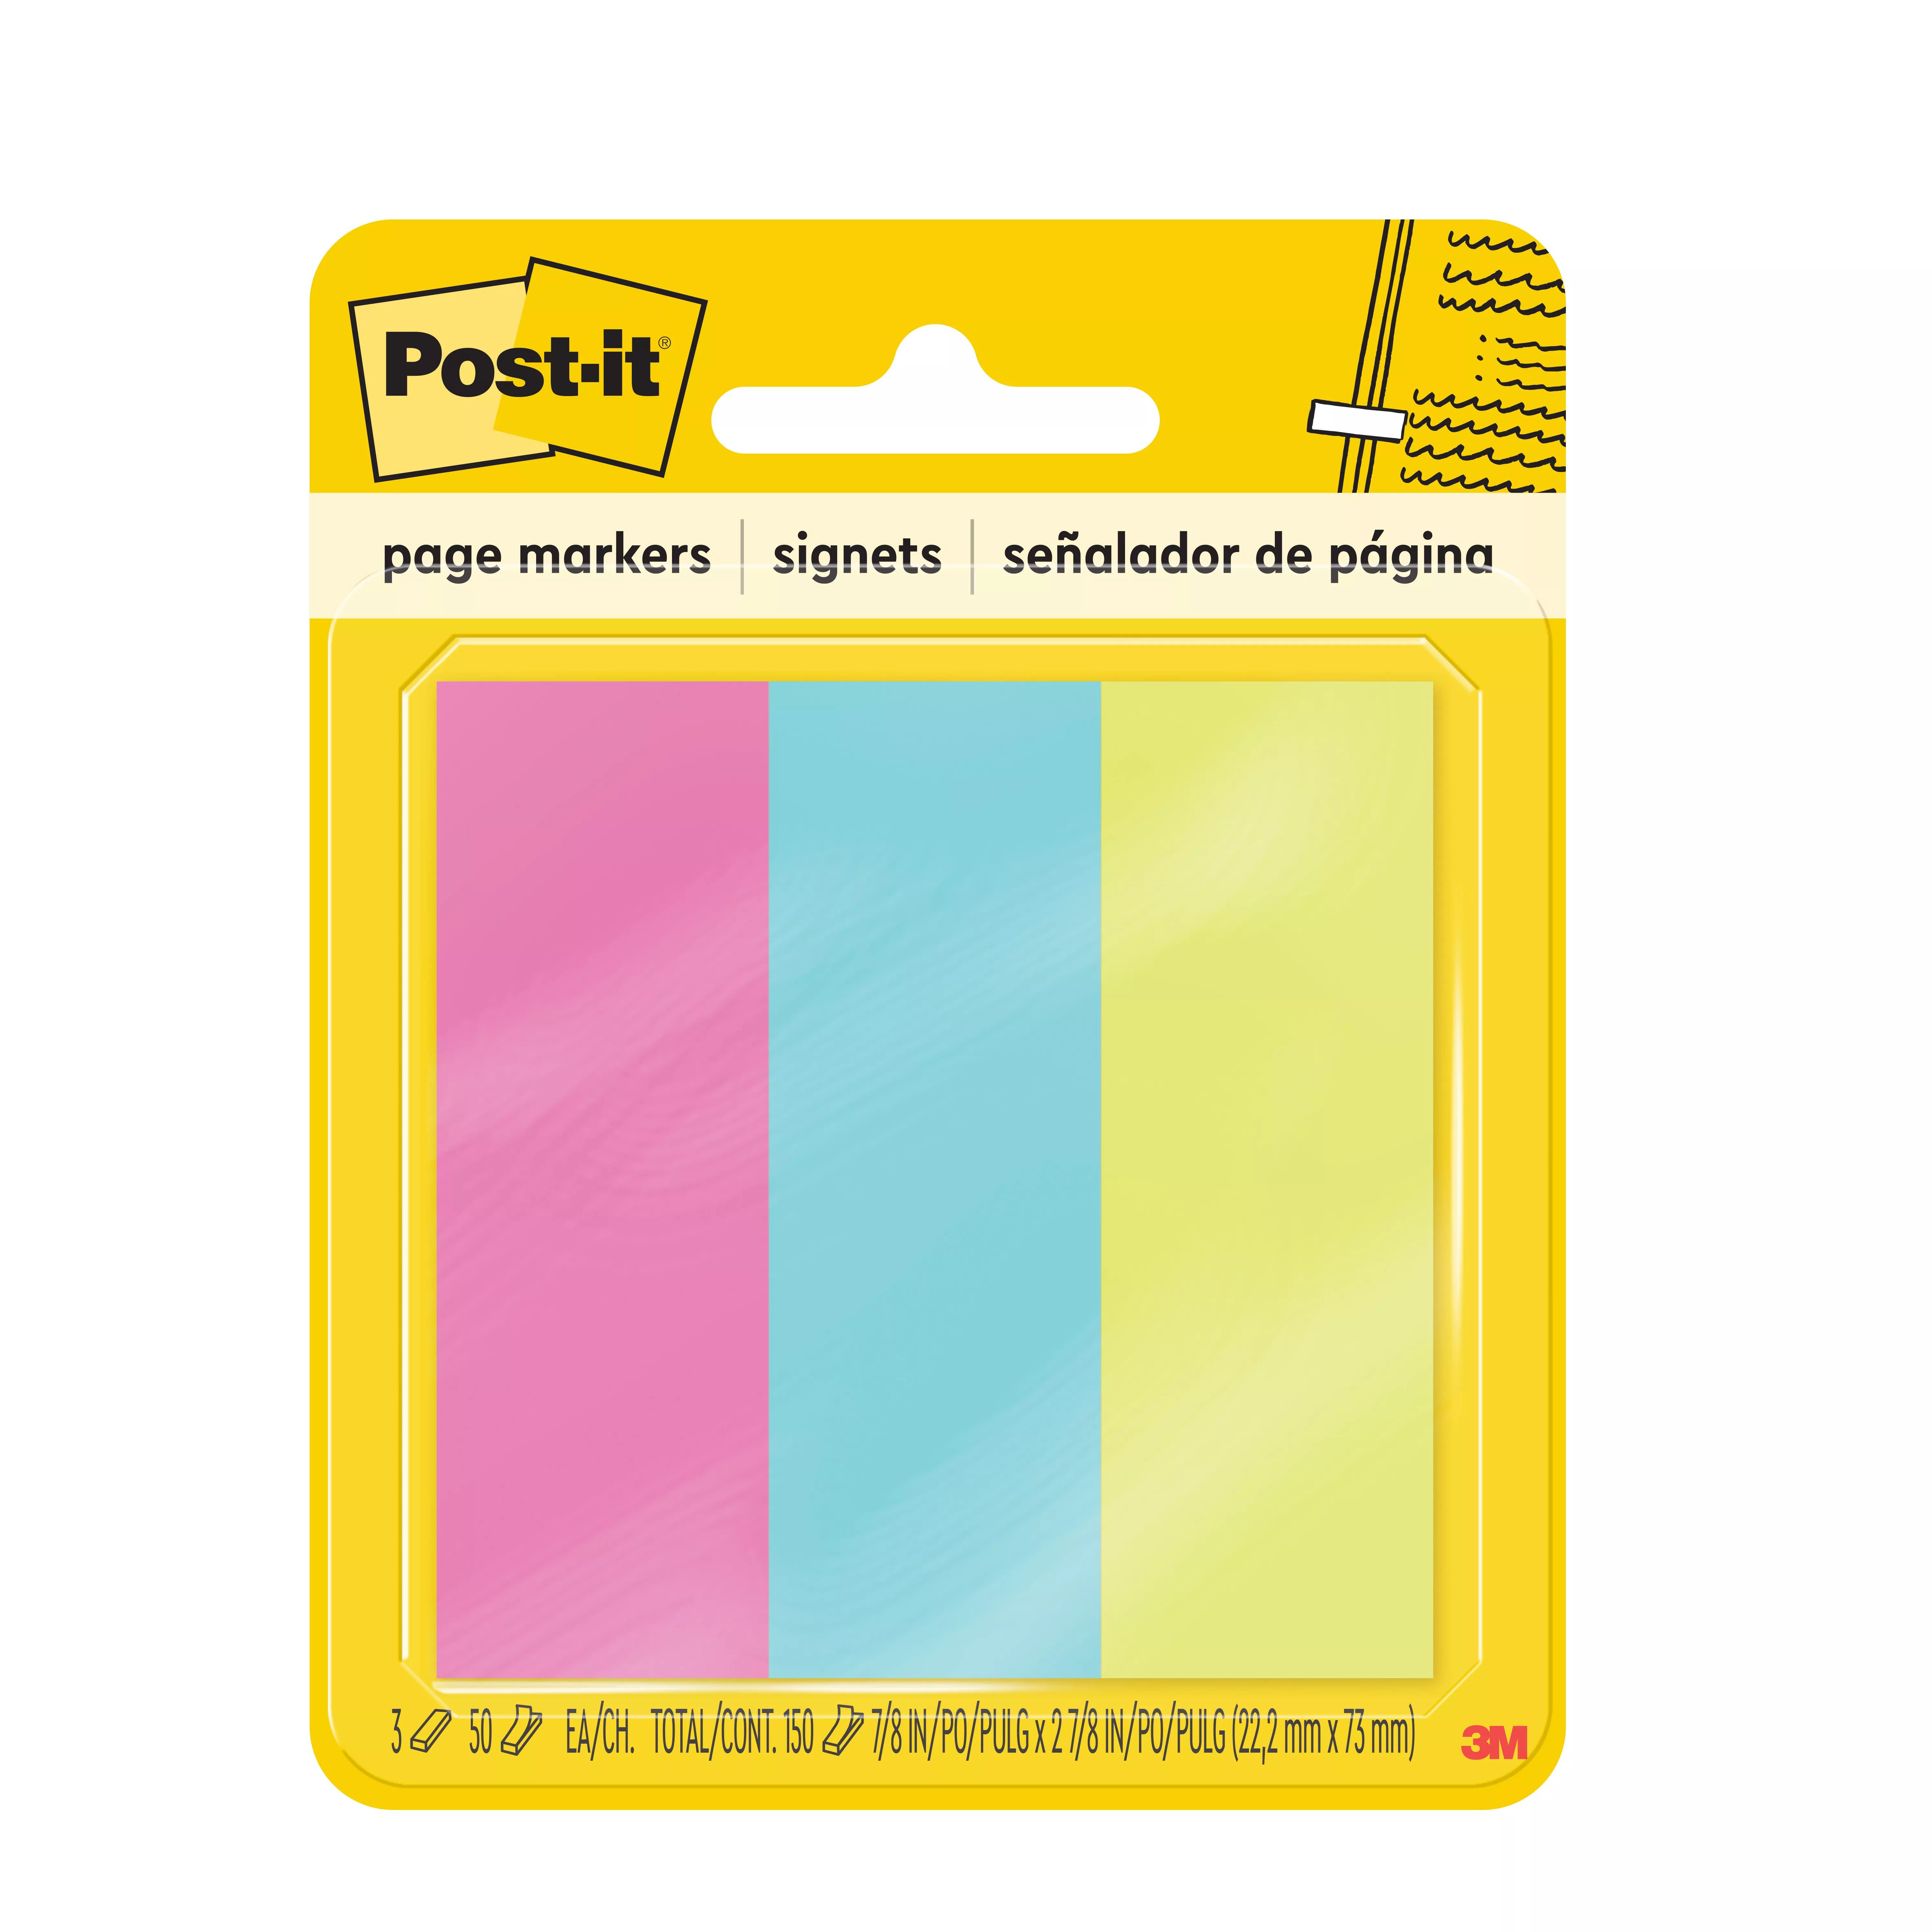 Post-it® Page Markers 5223, 7/8 in x 2 7/8 in (22.2 mm x 73 mm), Assorted Bright Colors